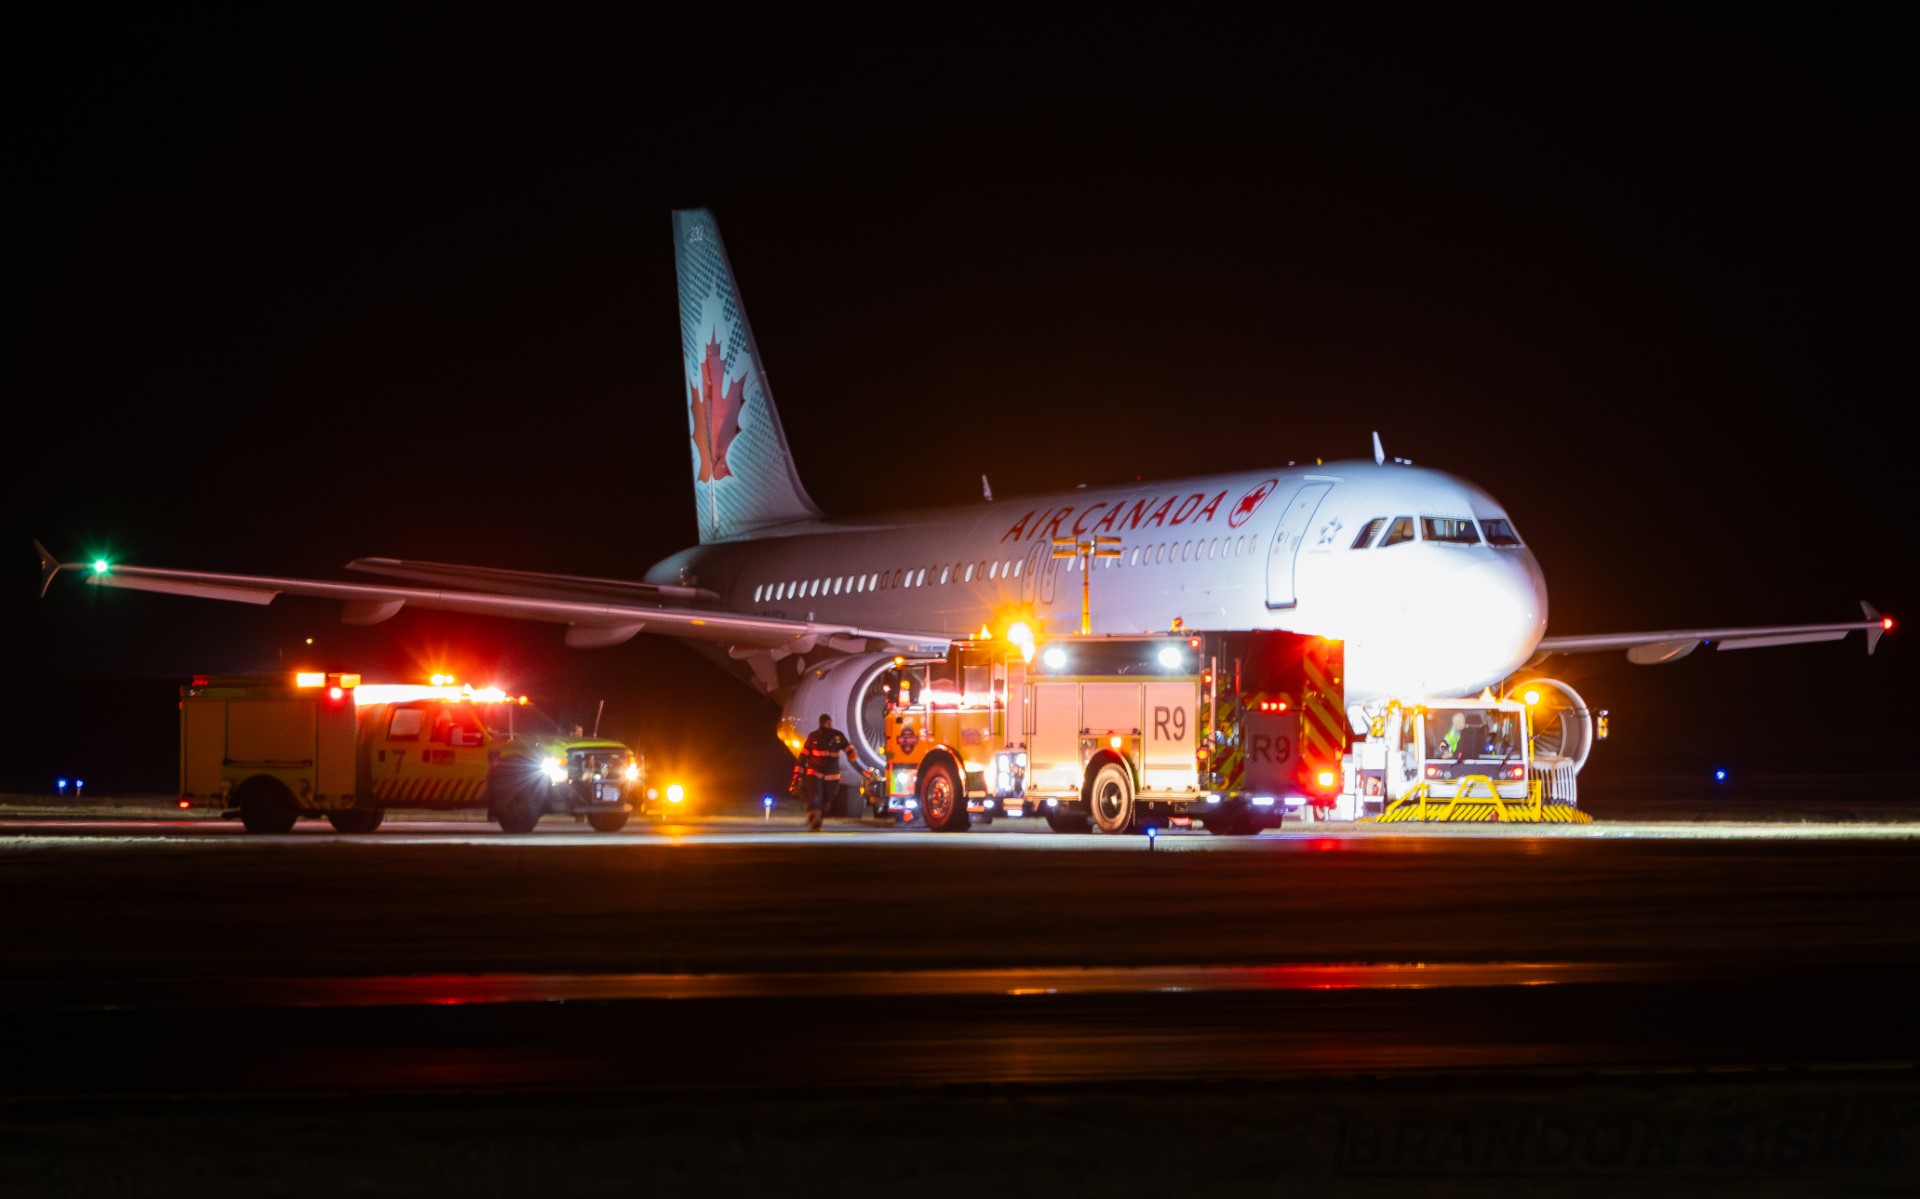 Vancouver Canucks plane briefly veers off taxiway at YVR as team comes home